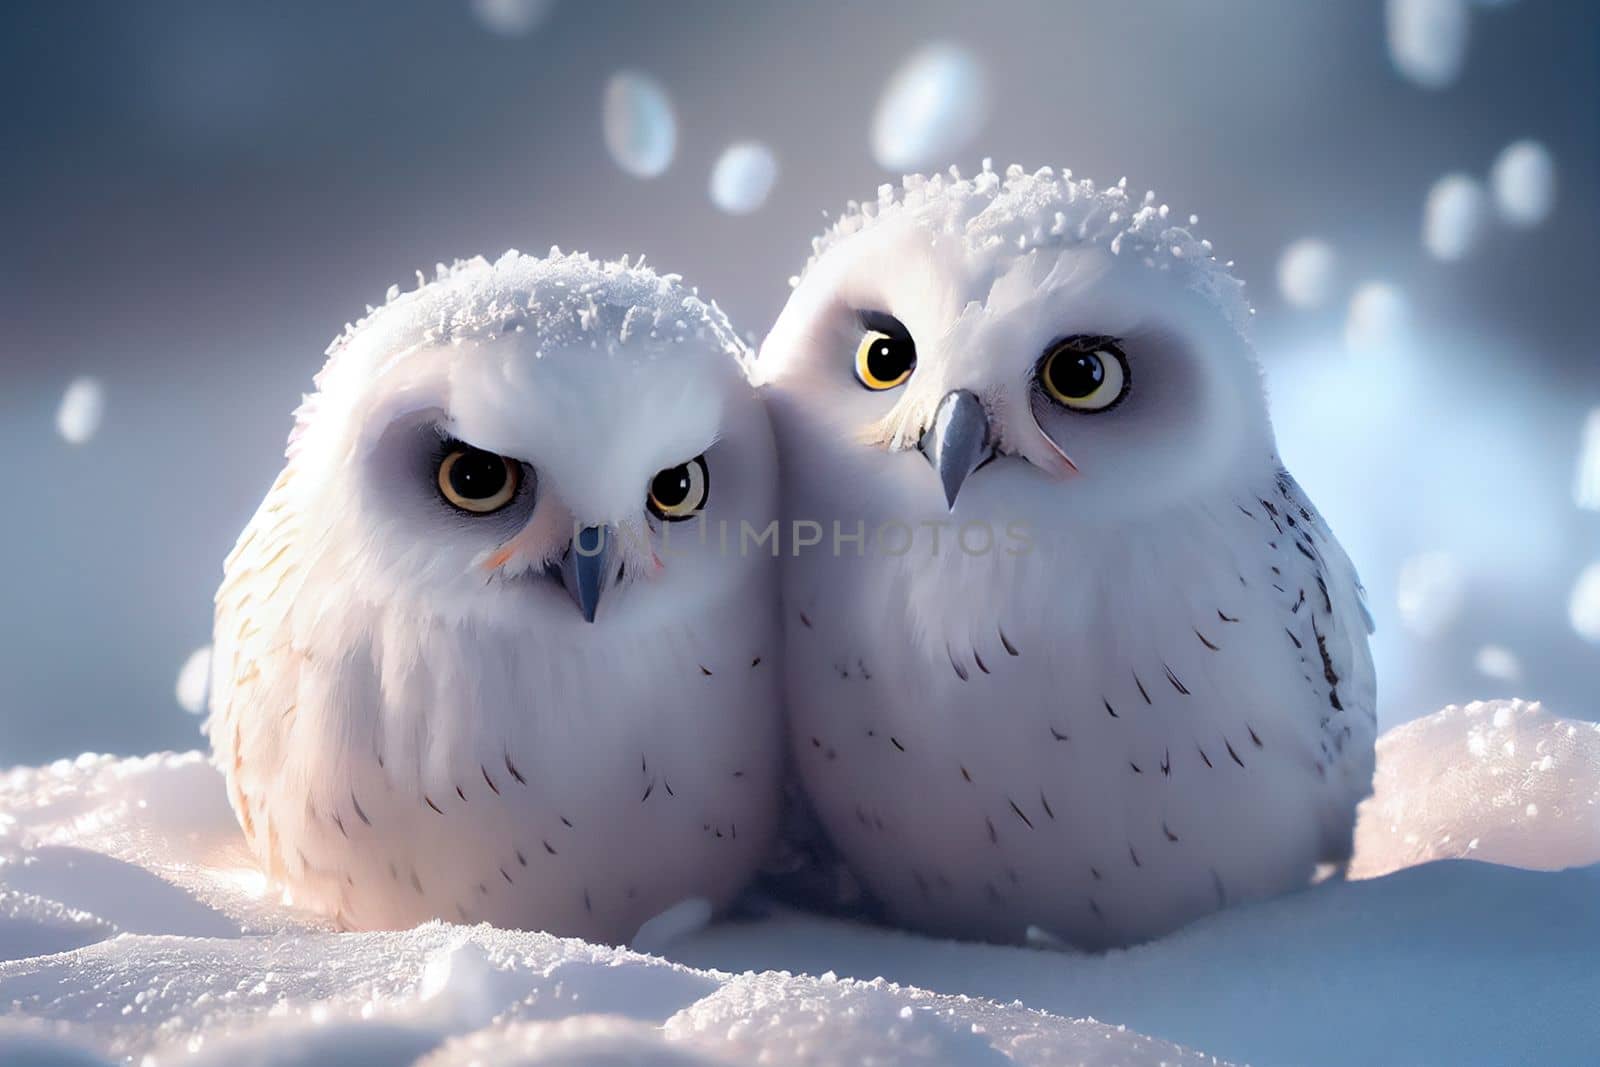 Two cute owlets couple sitting next to each other by studiodav